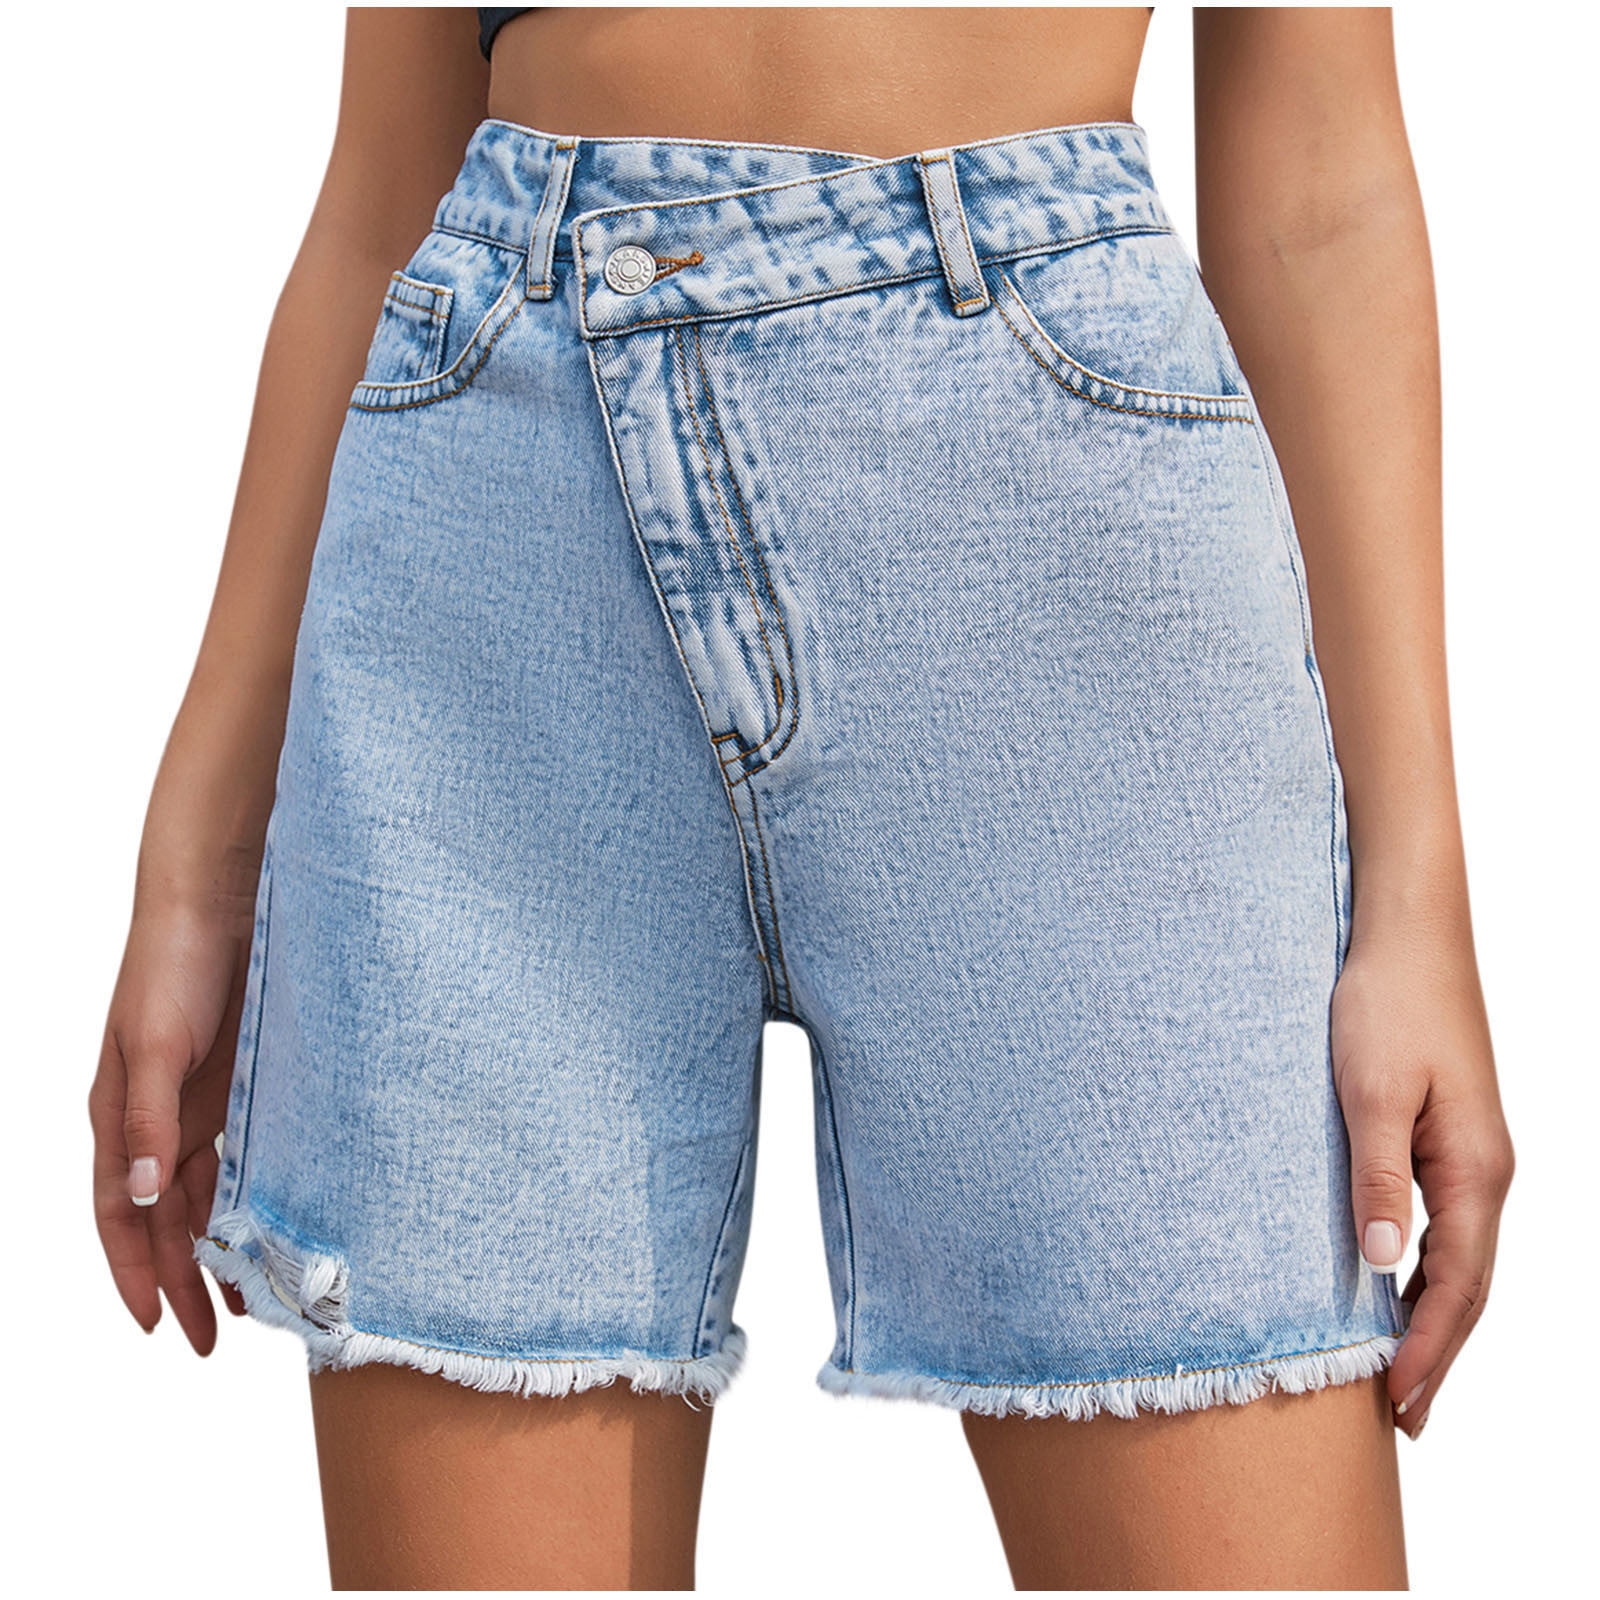 Jeans Shorts for Women High Waisted Ripped Frayed Raw Hem Denim Shorts  Stretchy Casual Summer Shorts with Pockets - Walmart.com